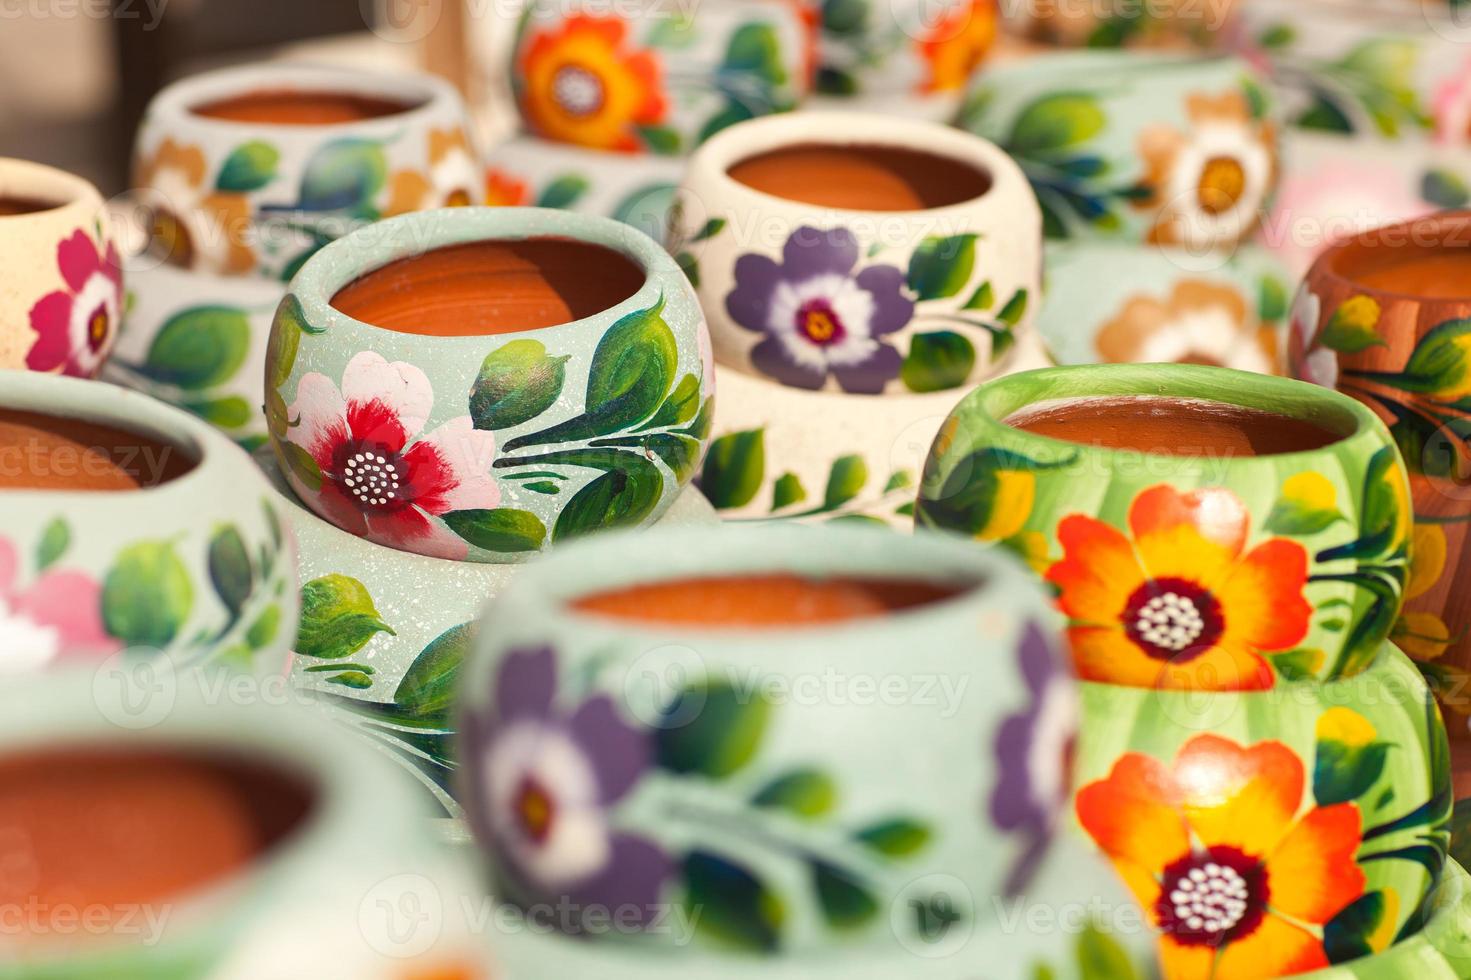 Variety of Colorfully Painted Ceramic Pots. photo